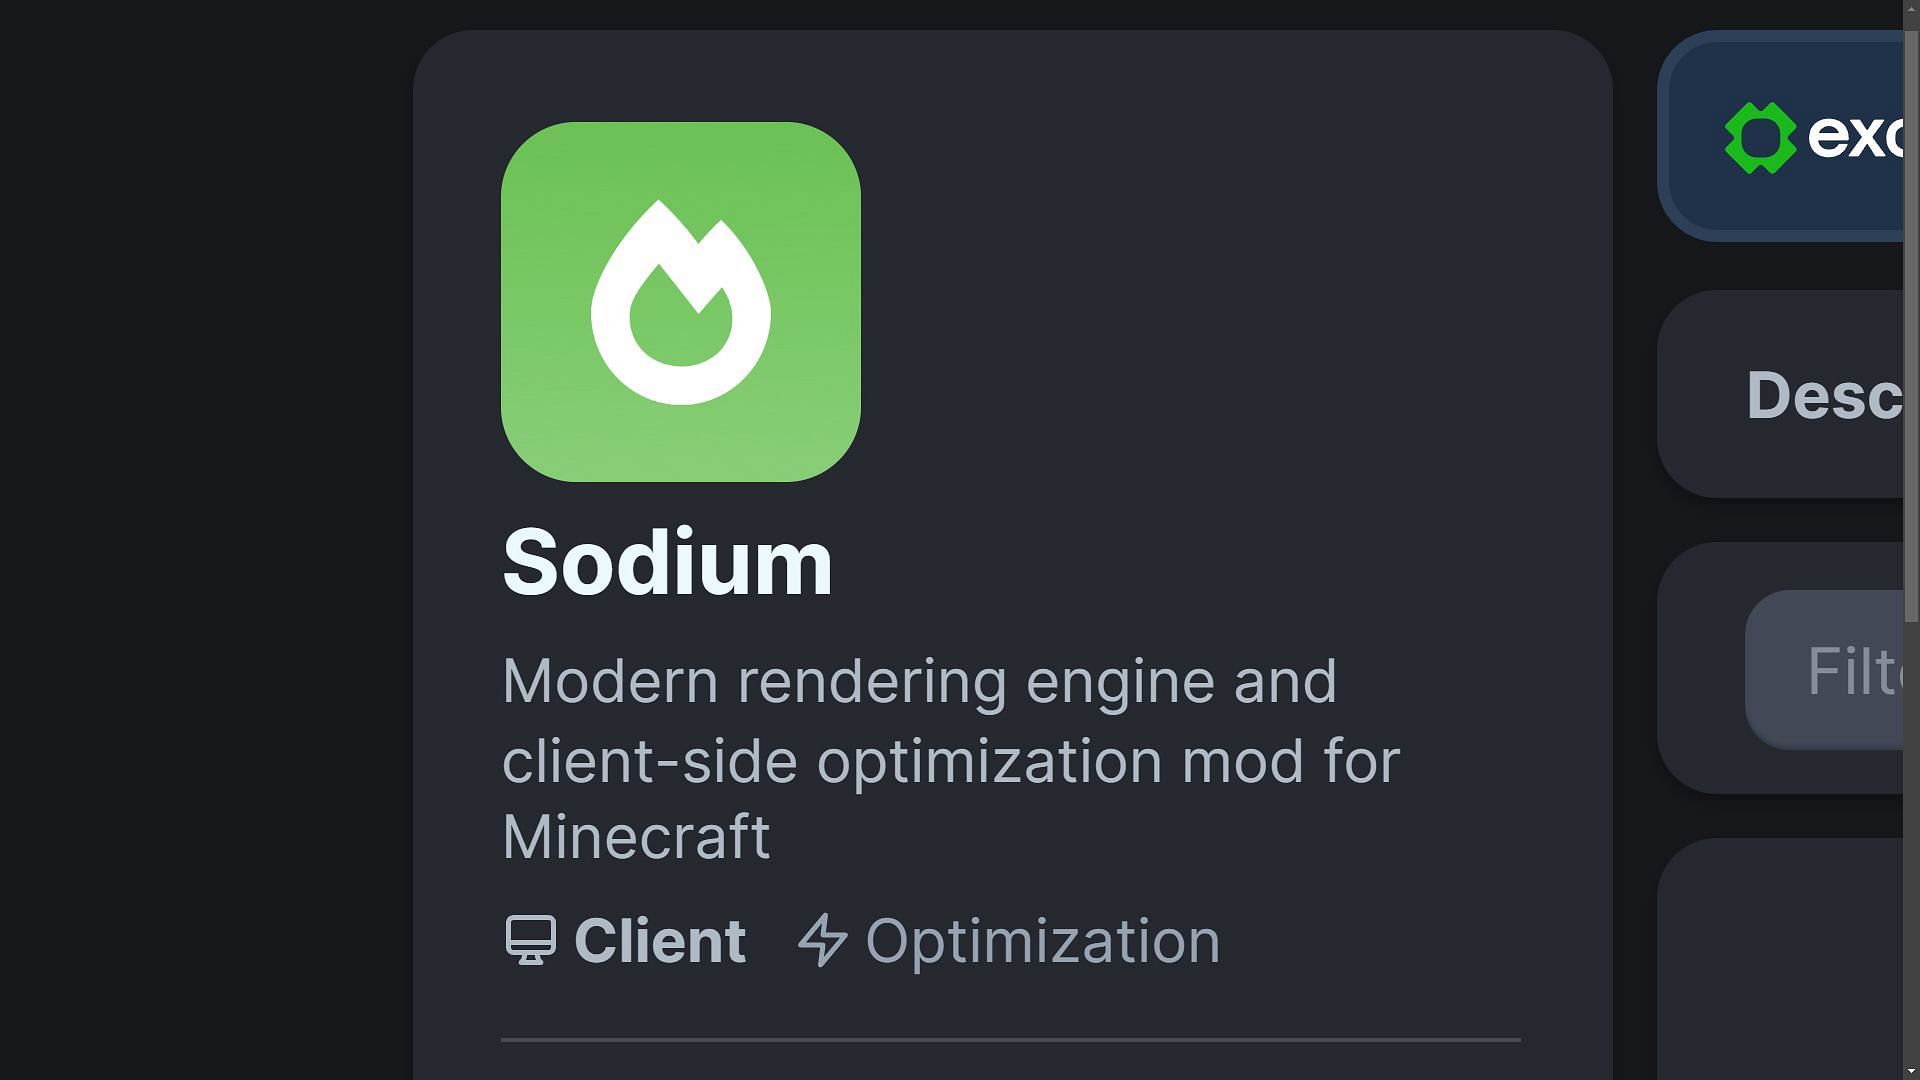 Sodium is a performance mod that drastically increases FPS and overall performance of Minecraft (Image via Sportskeeda)